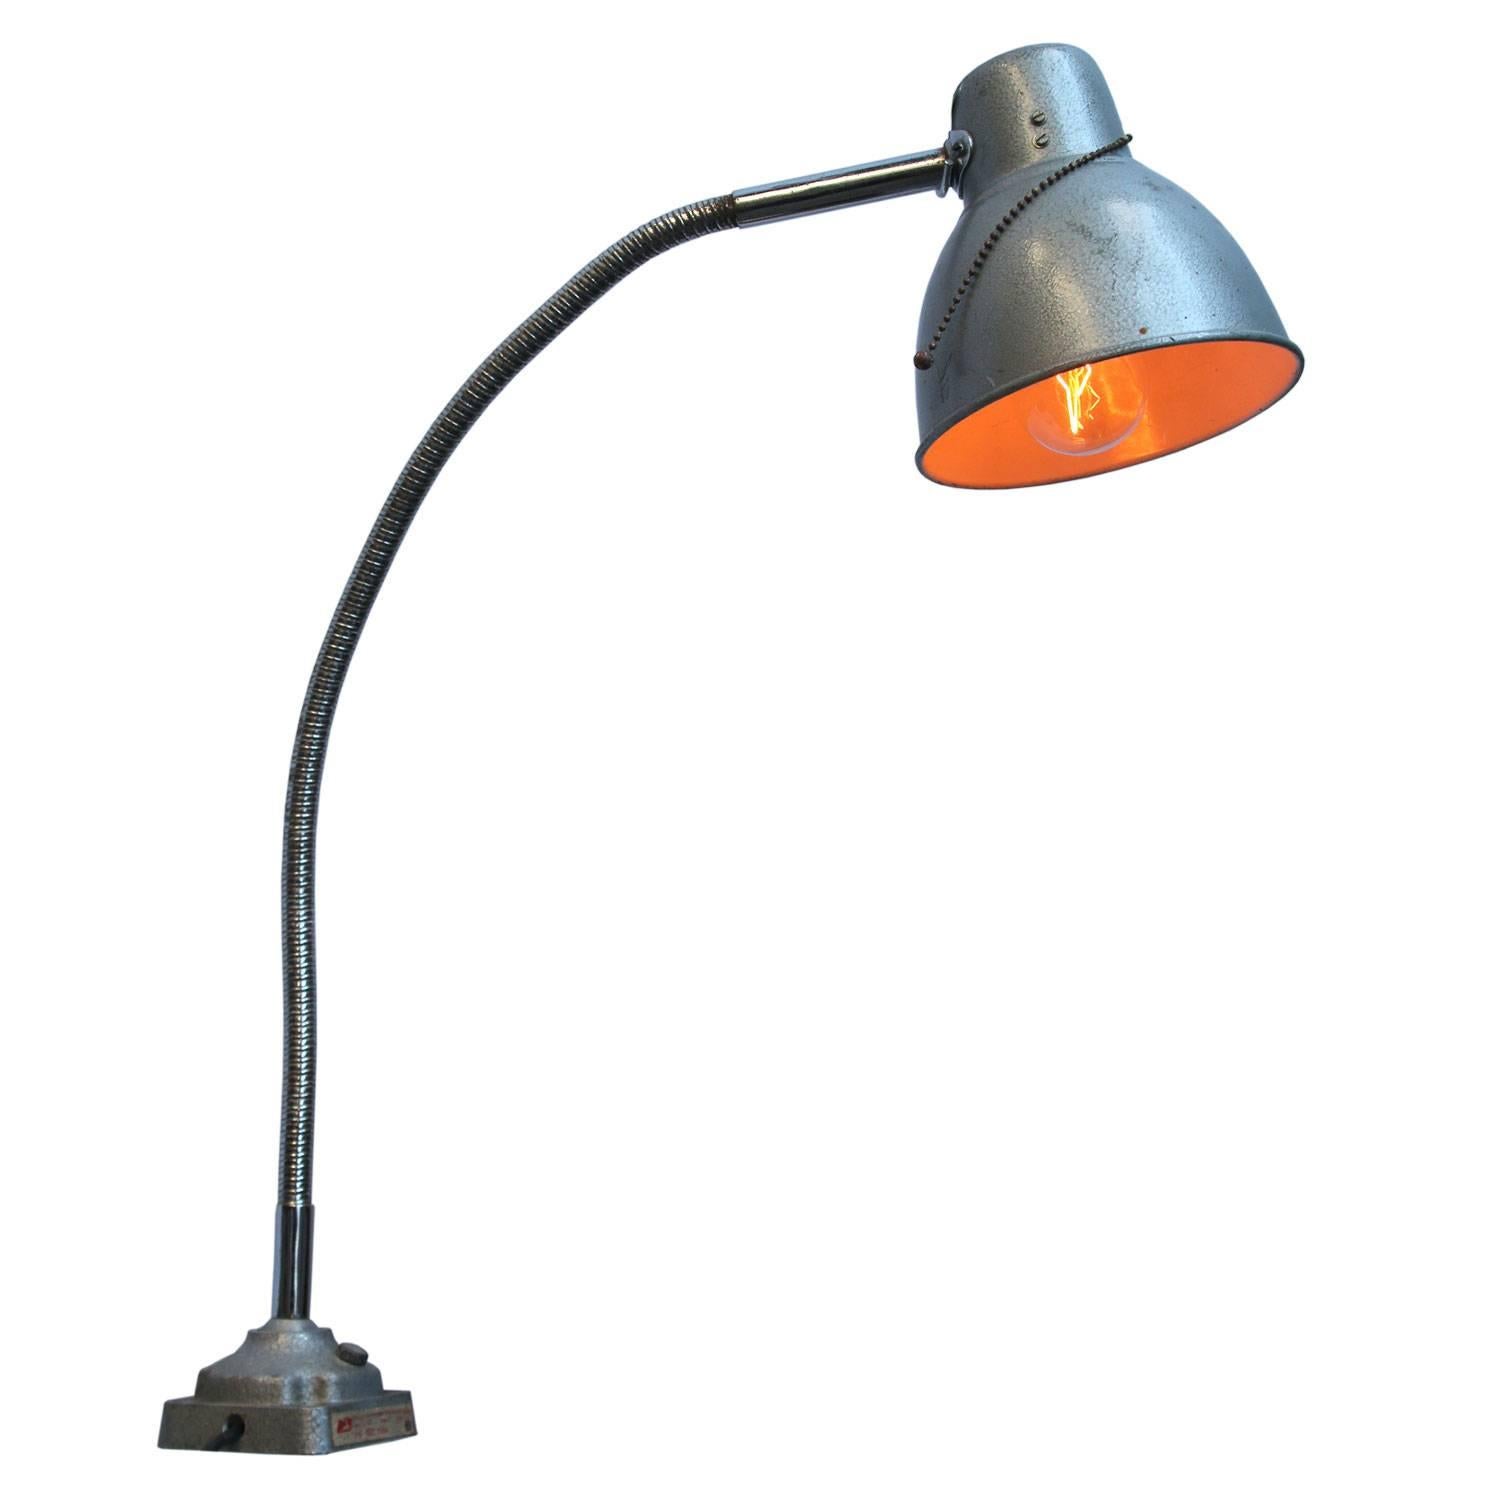 Metal work light with flexible arm. Aluminium shade. Pul chain bulb holder.

Weight: 1.4 kg / 3,1 lb

All lamps have been made suitable by international standards for incandescent light bulbs, energy-efficient and LED bulbs. E26/E27 bulb holders